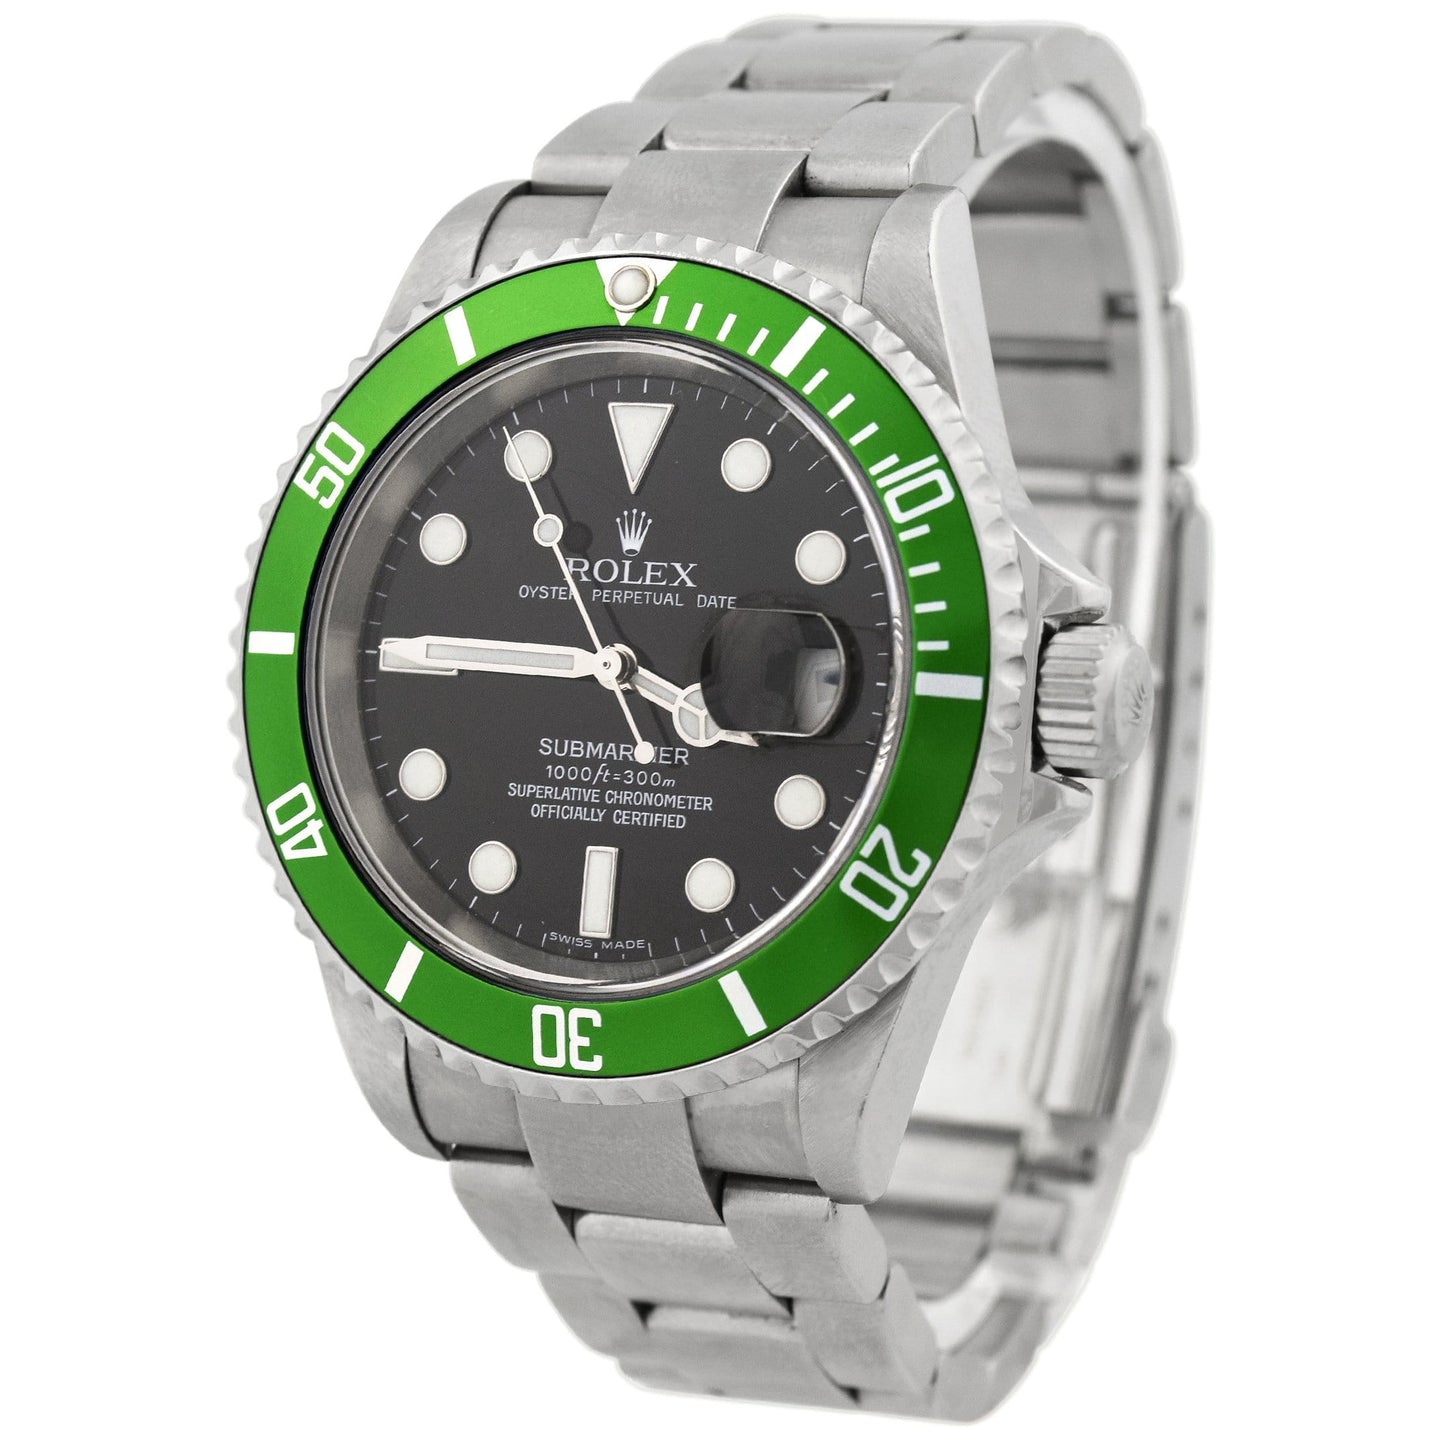 Rolex Submariner "Kermit" Stainless Steel 40mm Black Dot Dial Watch Reference #: 16610LV - Happy Jewelers Fine Jewelry Lifetime Warranty